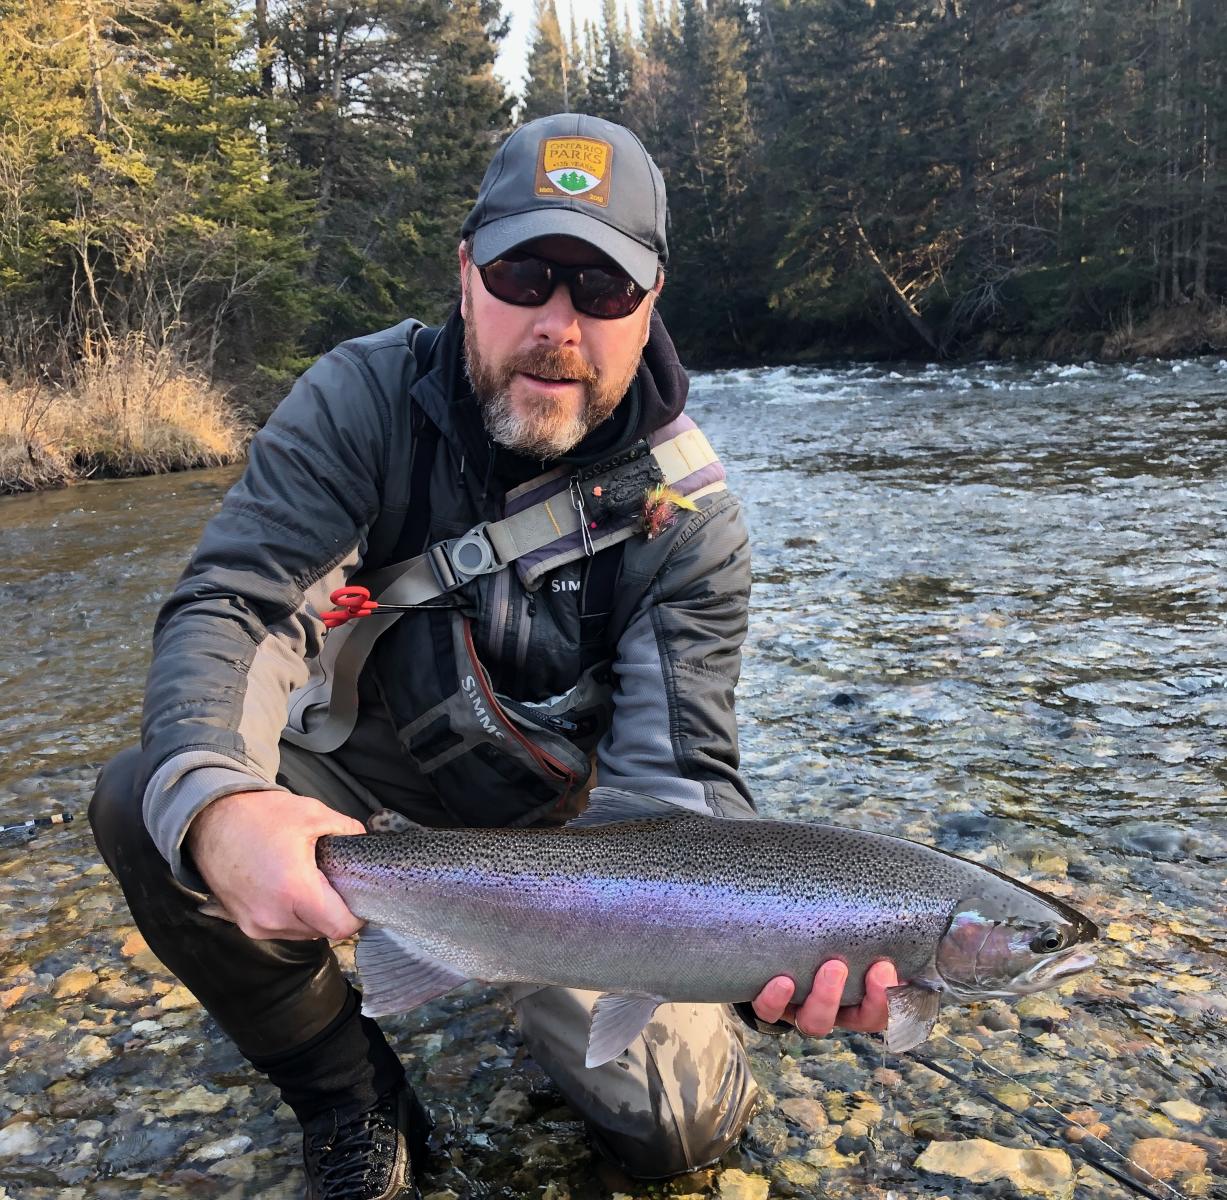 Lee Haslam holding a rainbow trout on the edge of a river